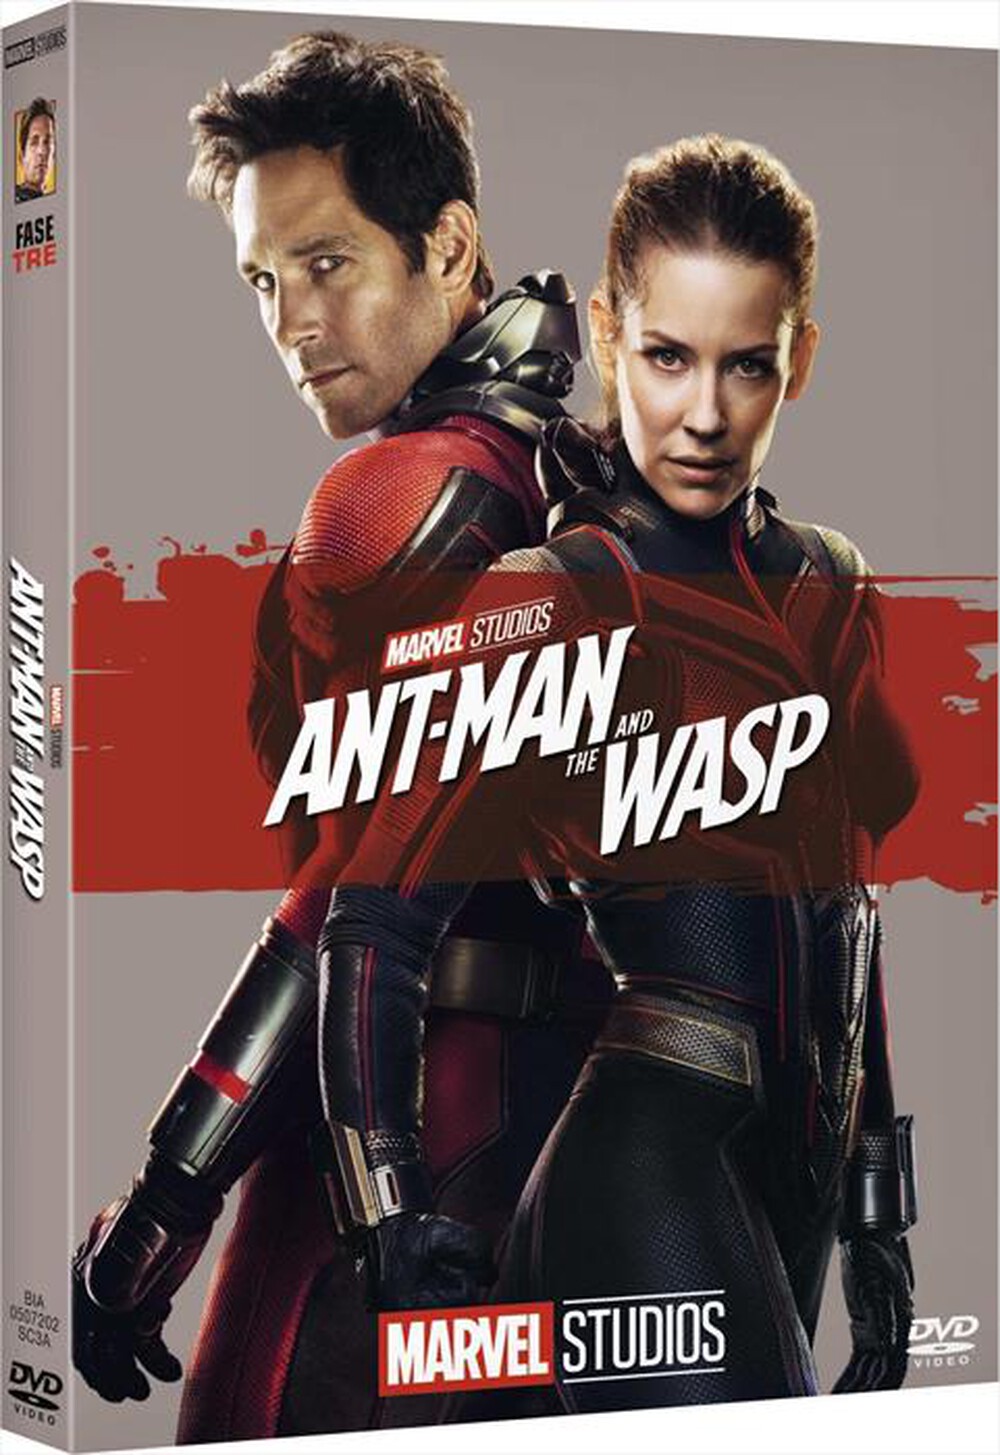 "EAGLE PICTURES - Ant-Man And The Wasp (10 Anniversario)"